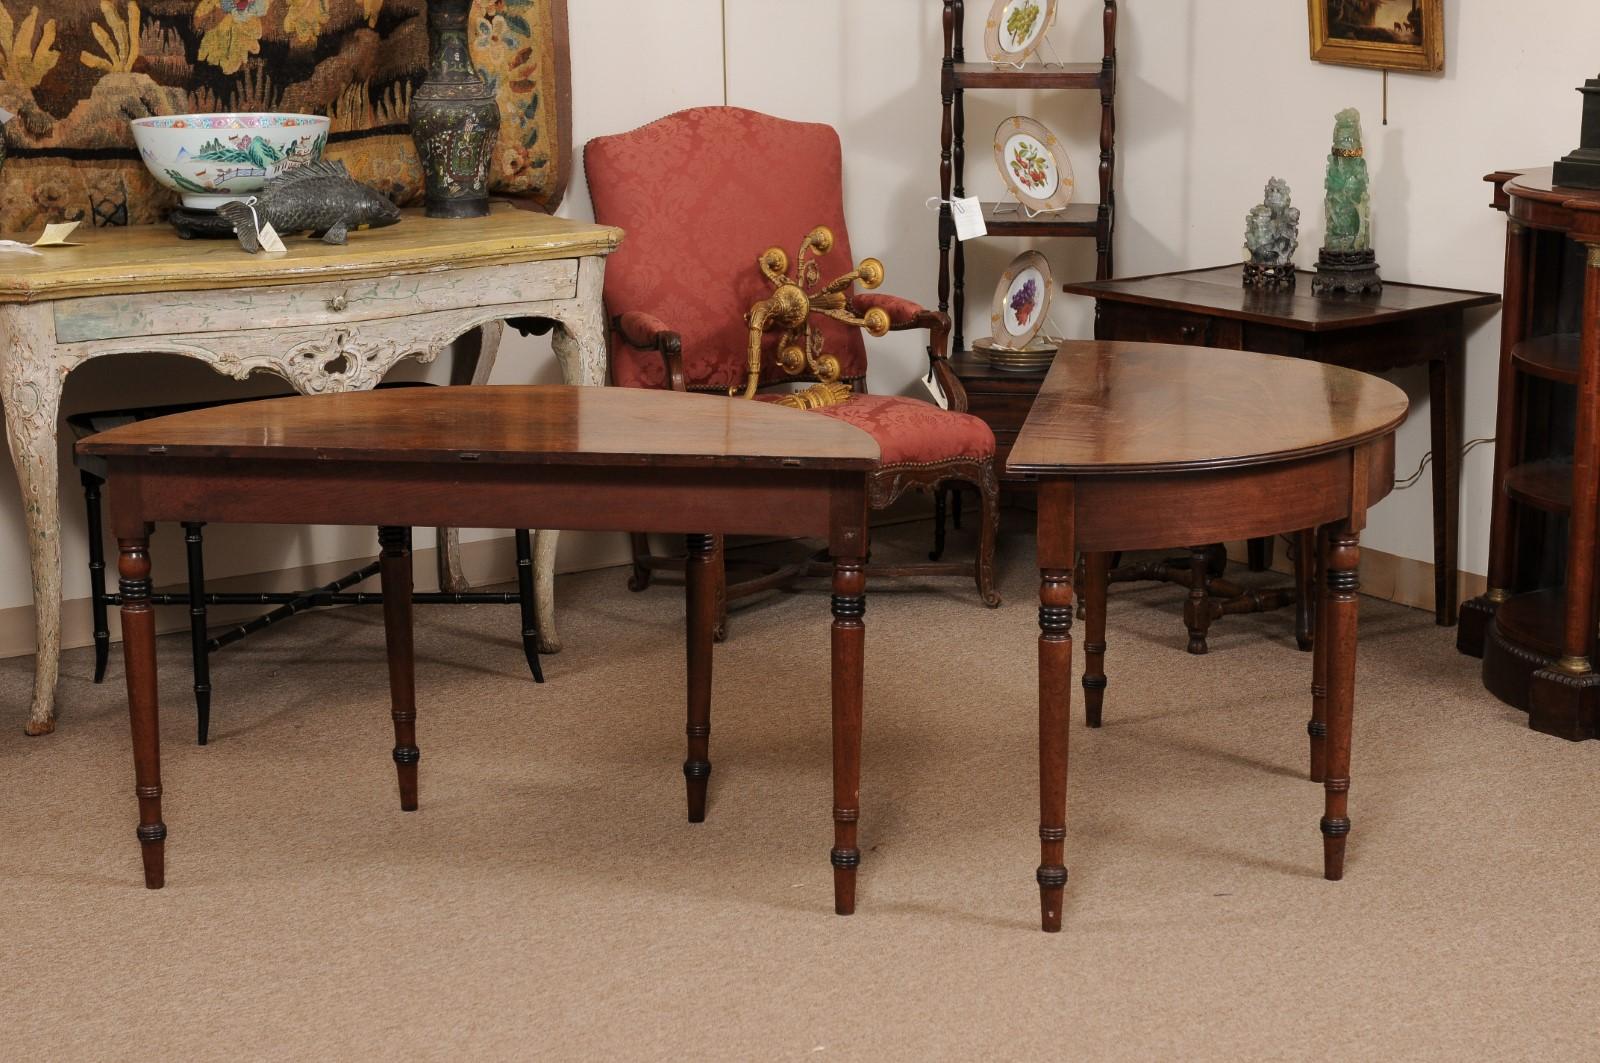 Pair of English Mahogany Demilune Console Tables with Turned Legs, 19th Century